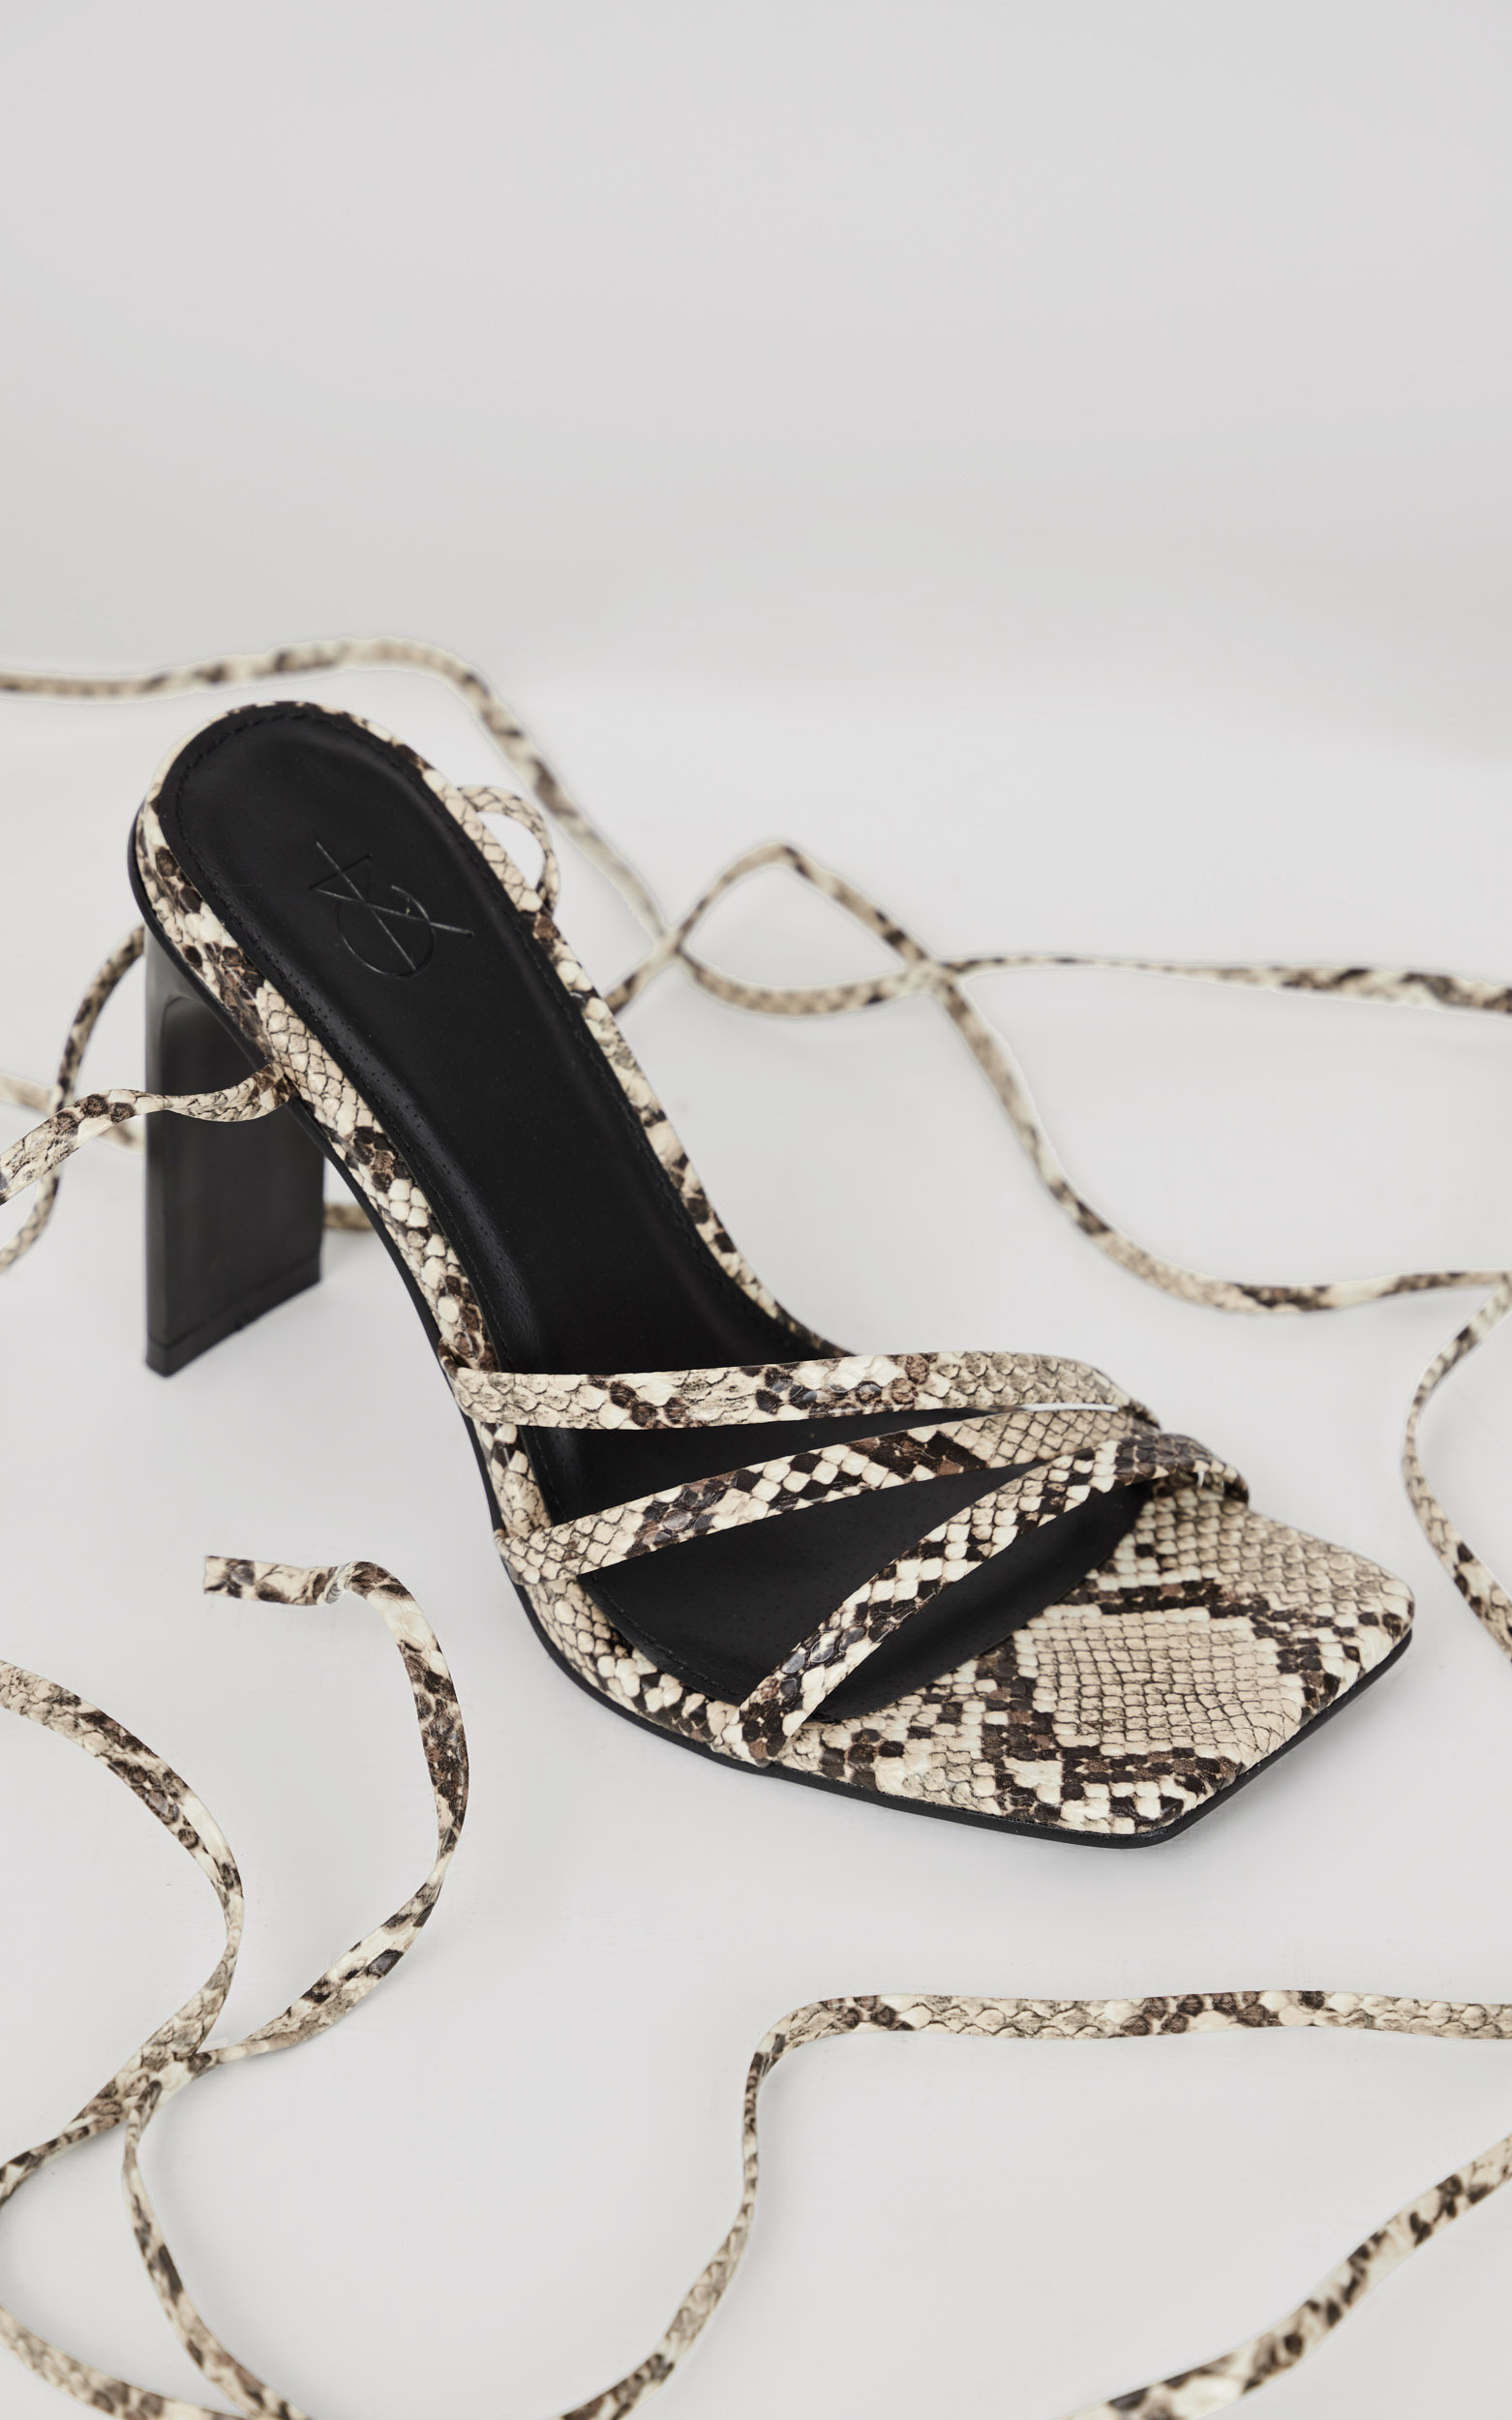 4th & Reckless - Dove Heels in Snake - 05, GRY1, hi-res image number null